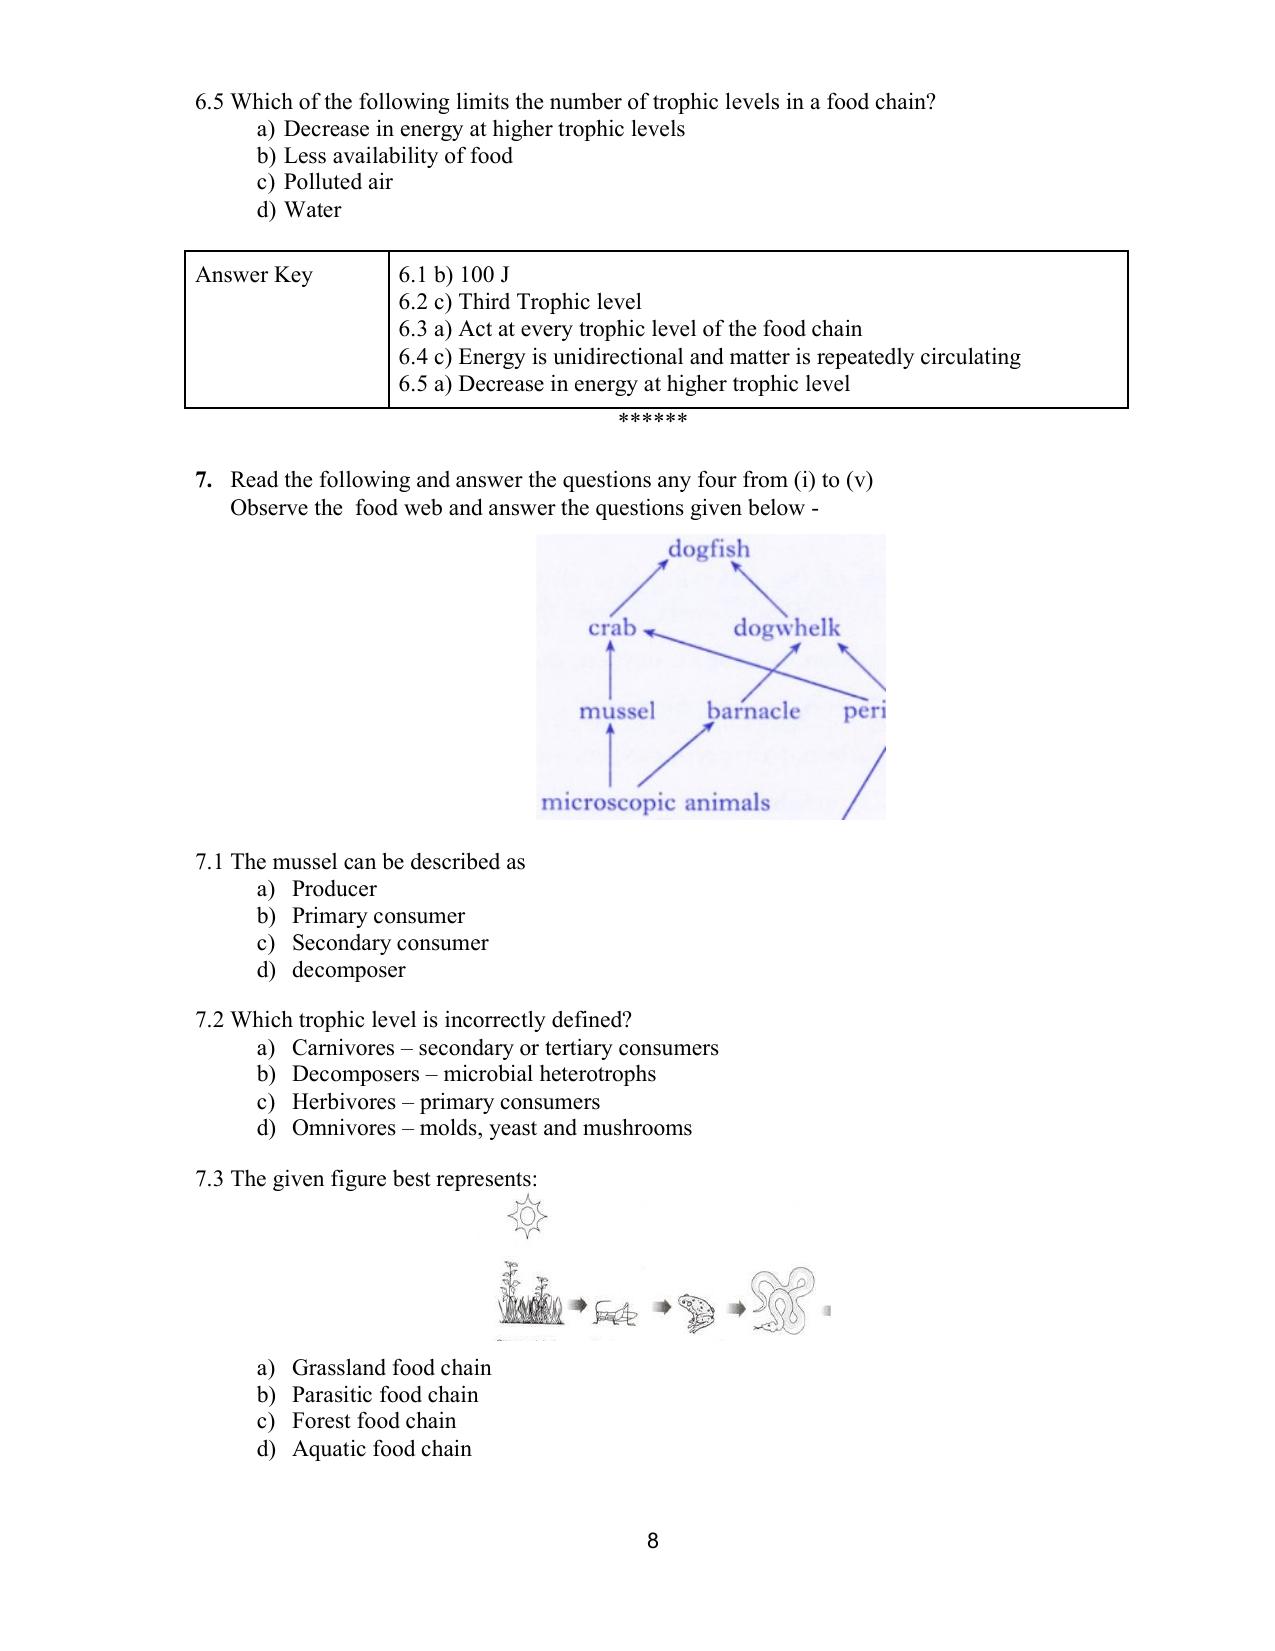 CBSE Class 10 Science Question Bank - Page 8